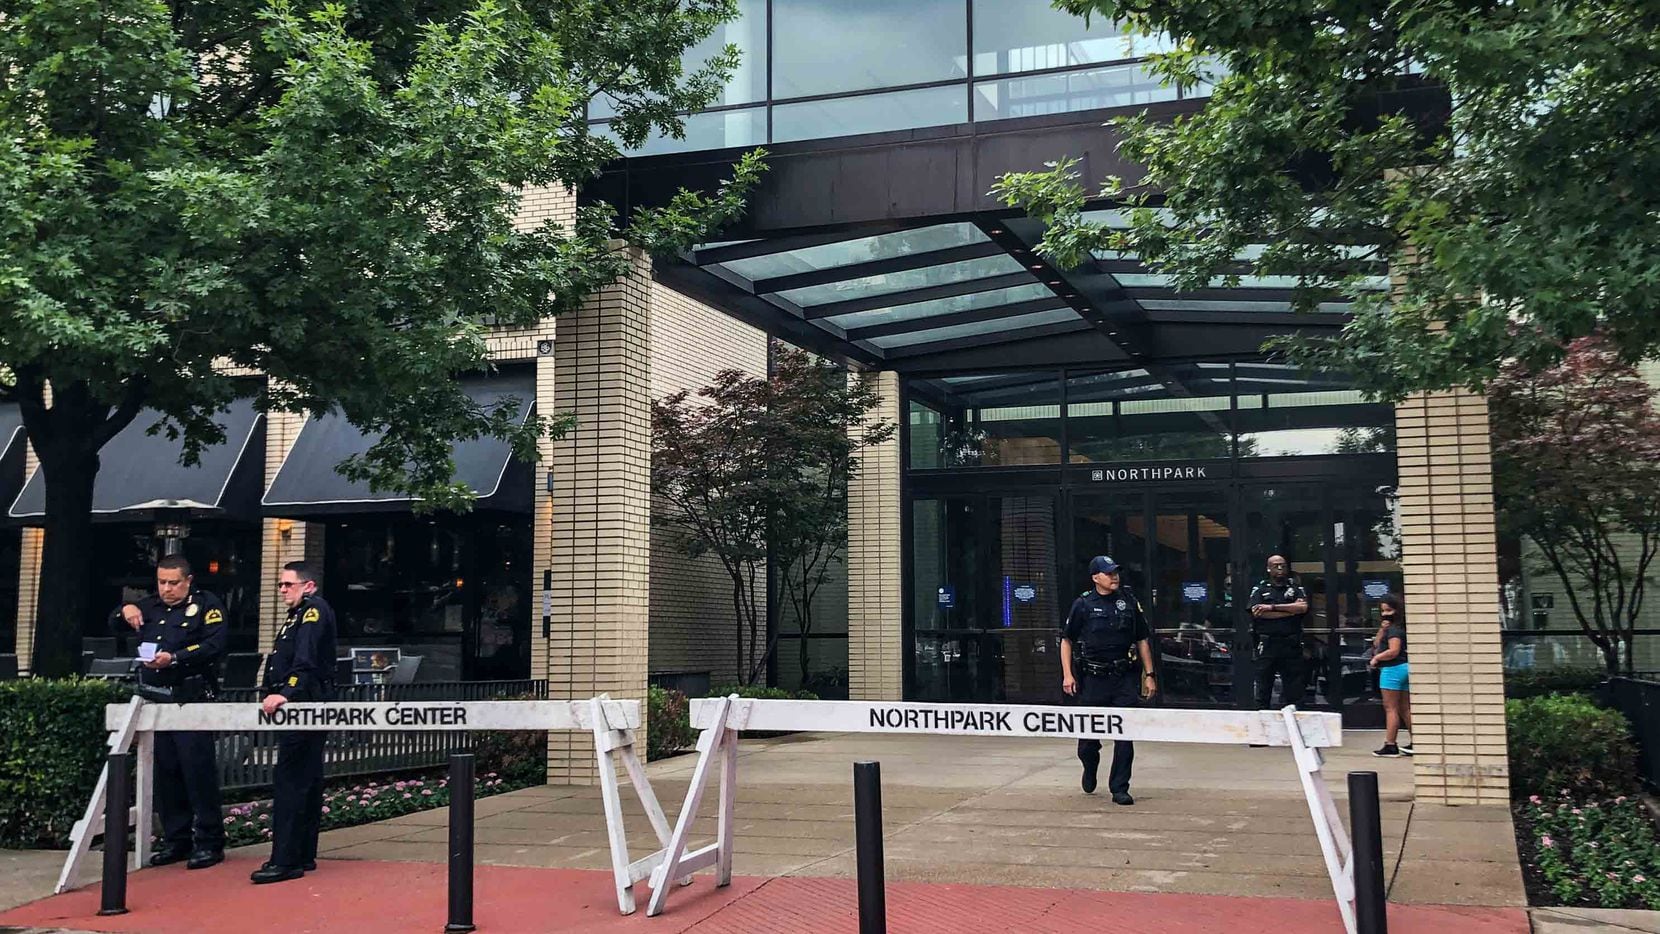 NorthPark Center shooting was actually banging skateboard: Police